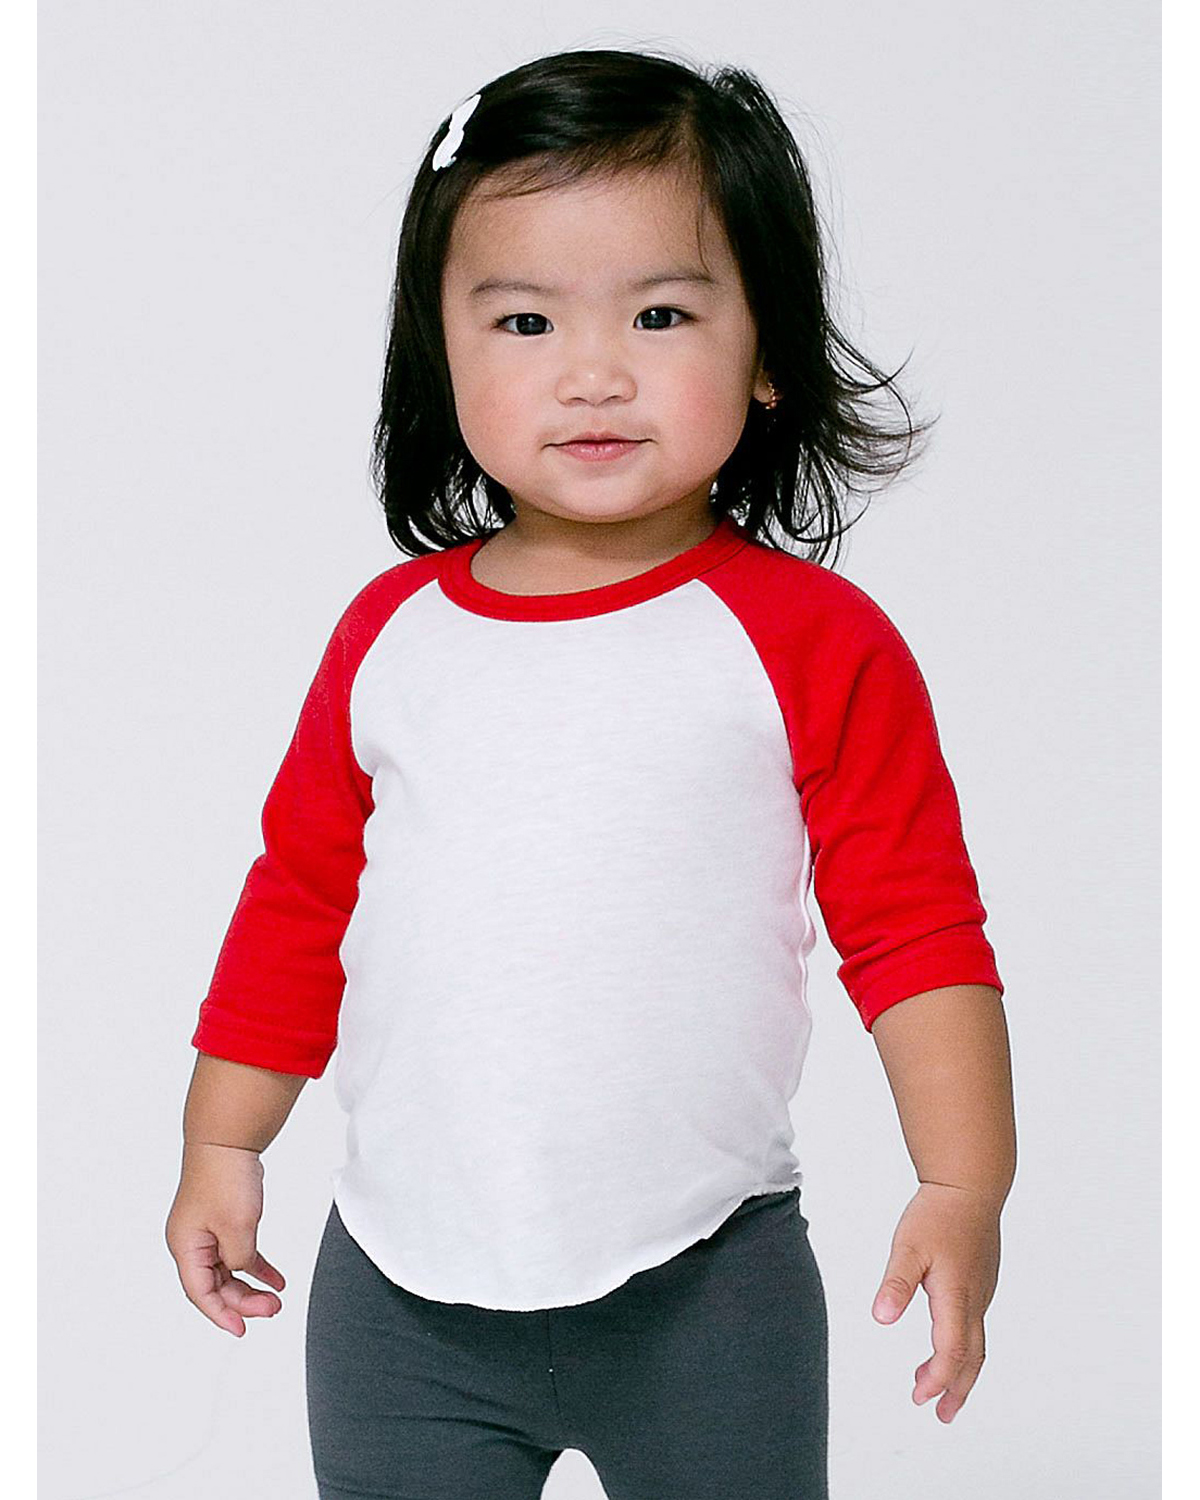 BB053W American Apparel Infant Poly-Cotton 3/4-Sleeve T-Shirt